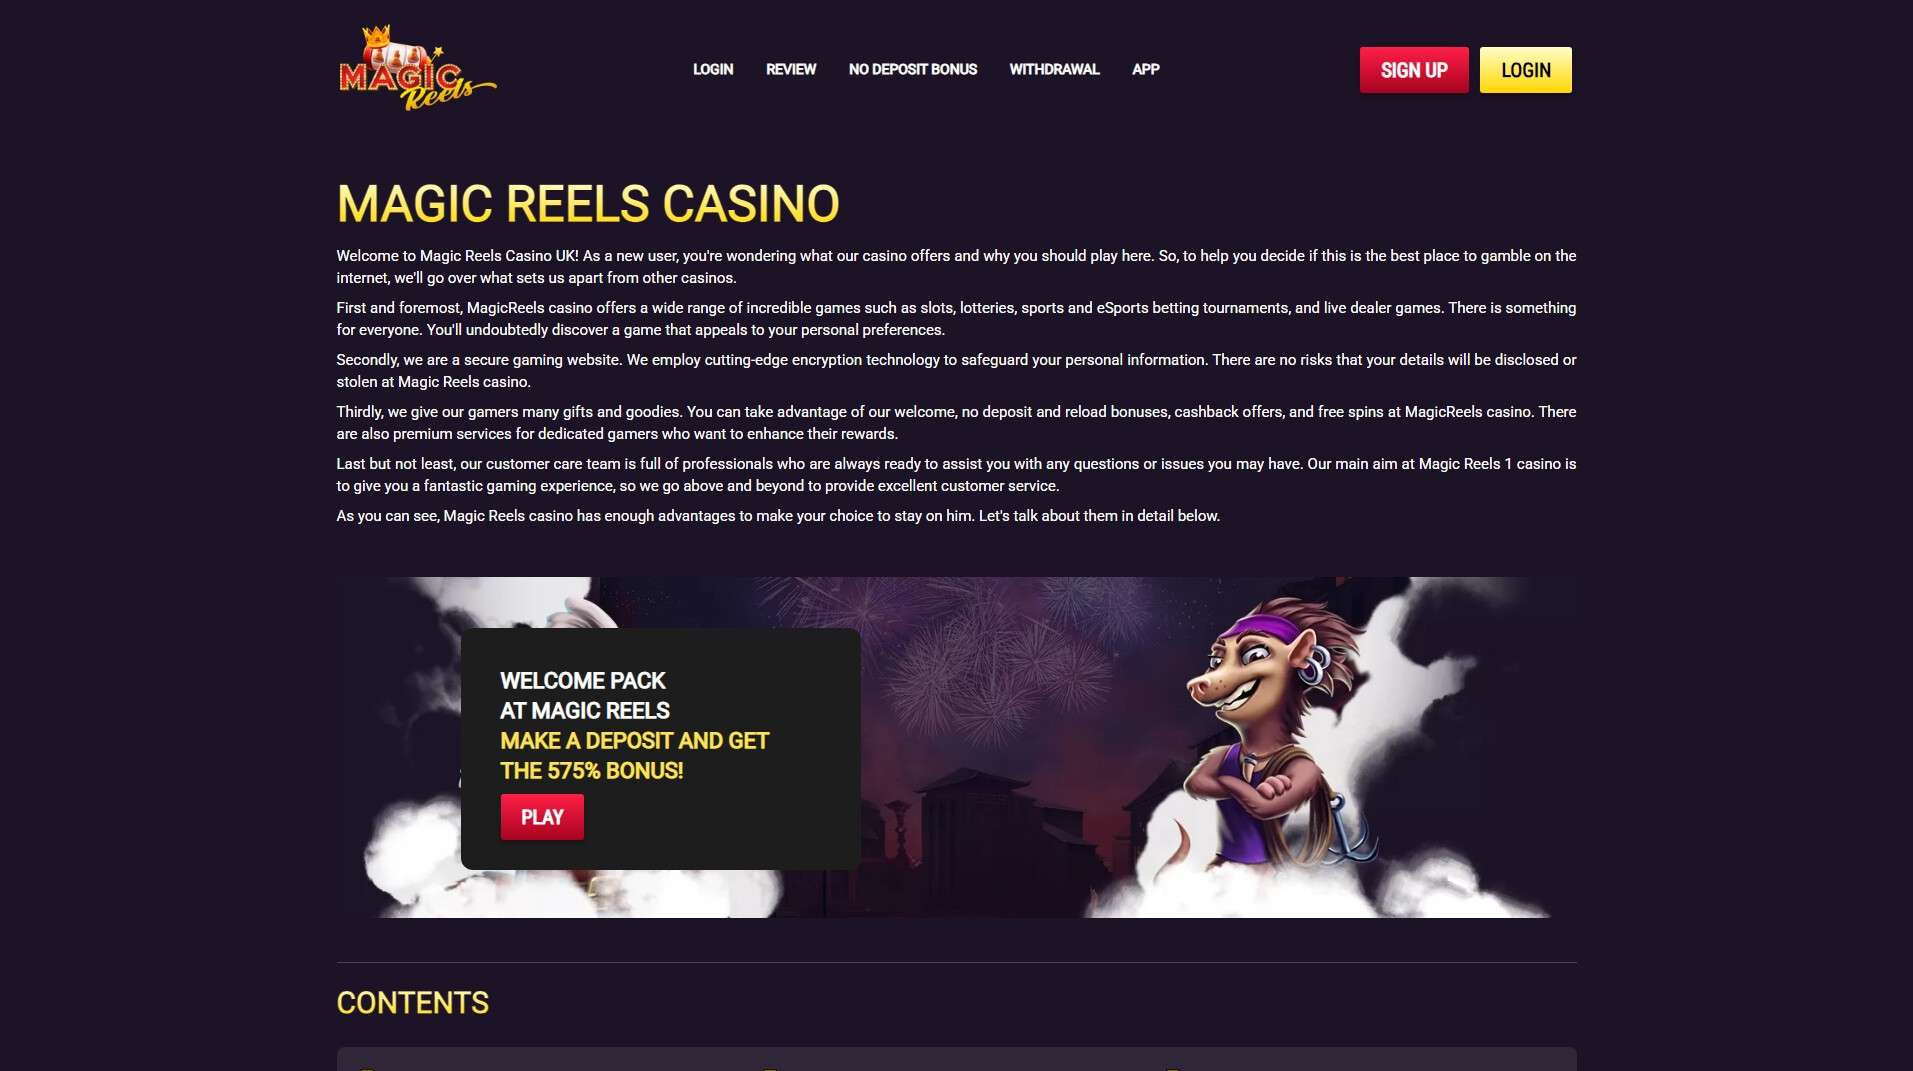 reels casino sign up